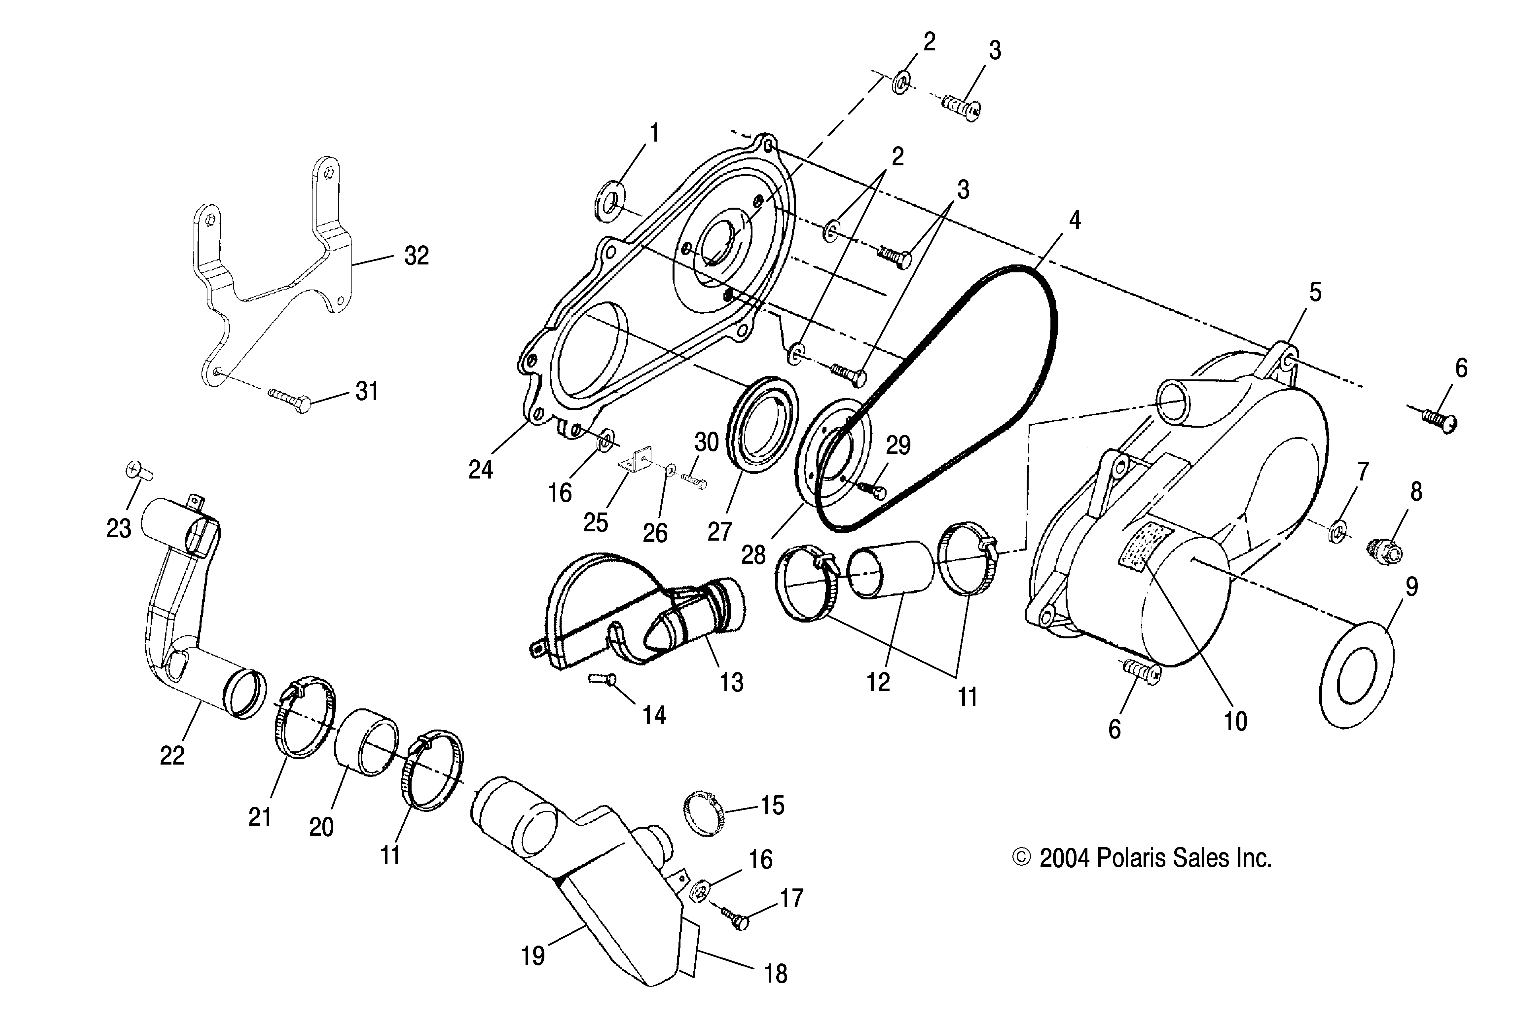 Part Number : 7172746 DECAL-AUTOMATIC TRANSMISSION